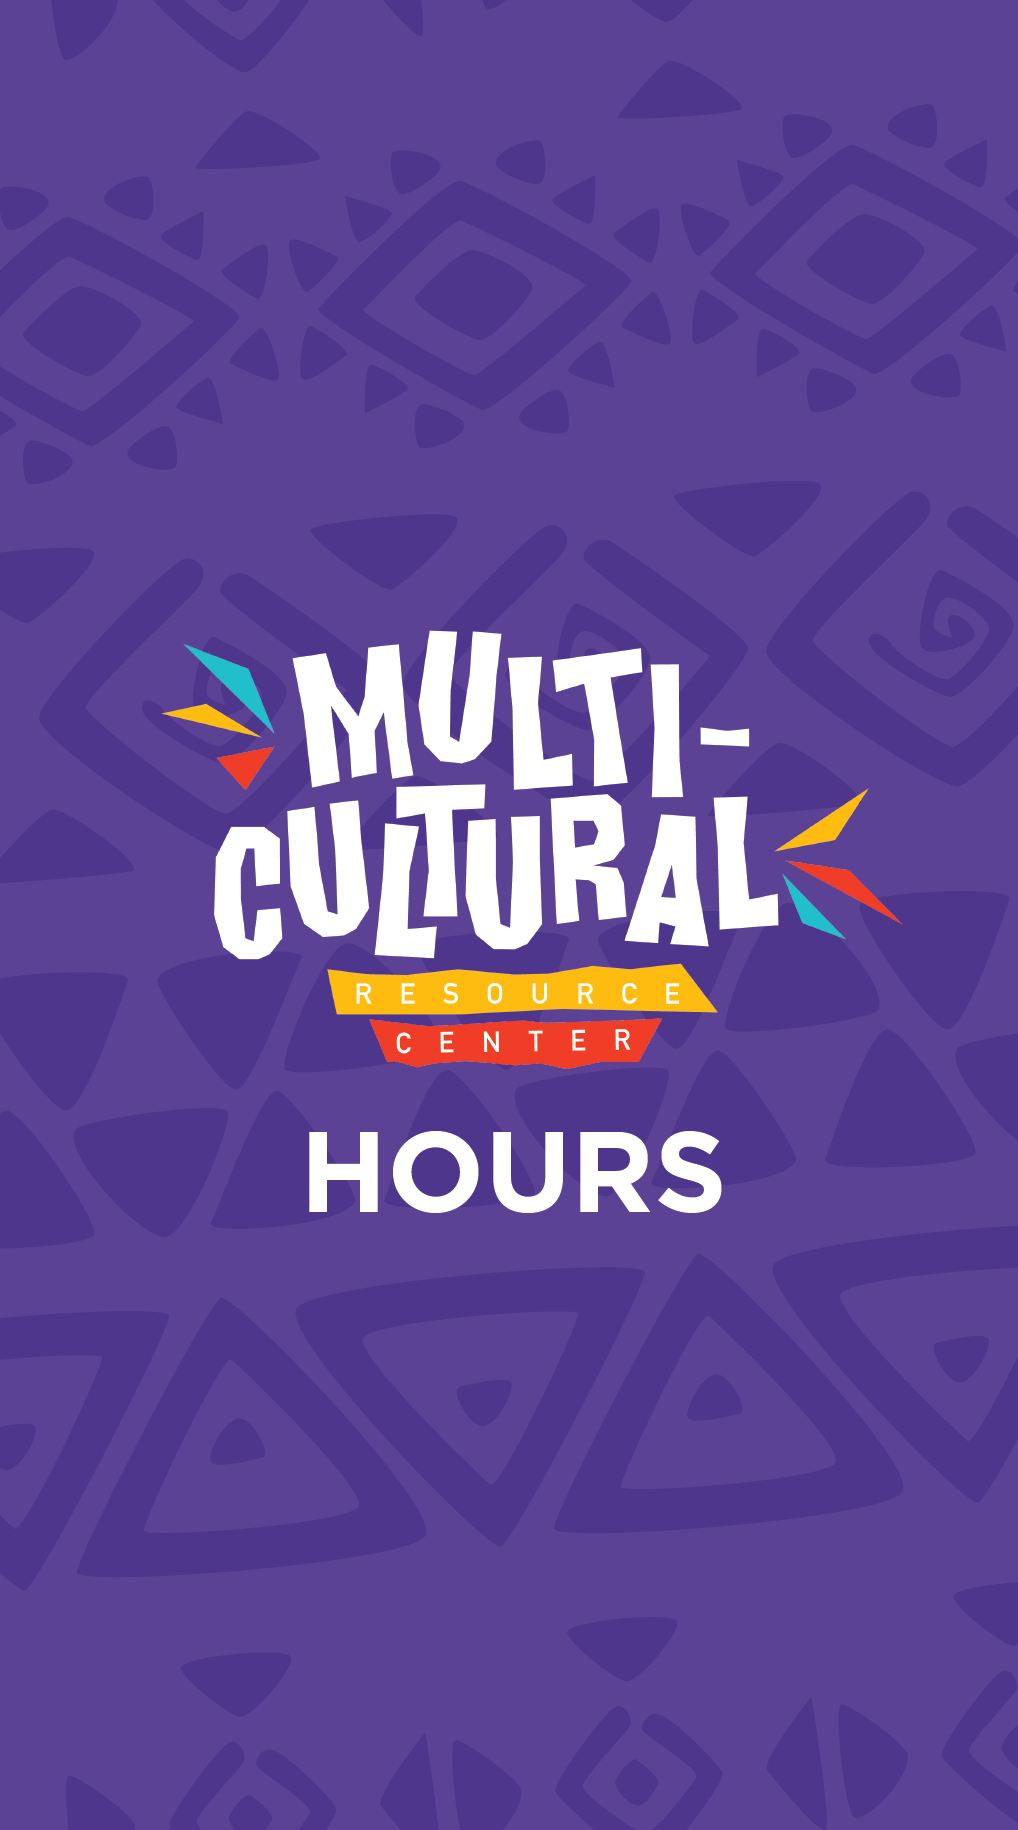 Title: Multicultural Resource Center Hours 